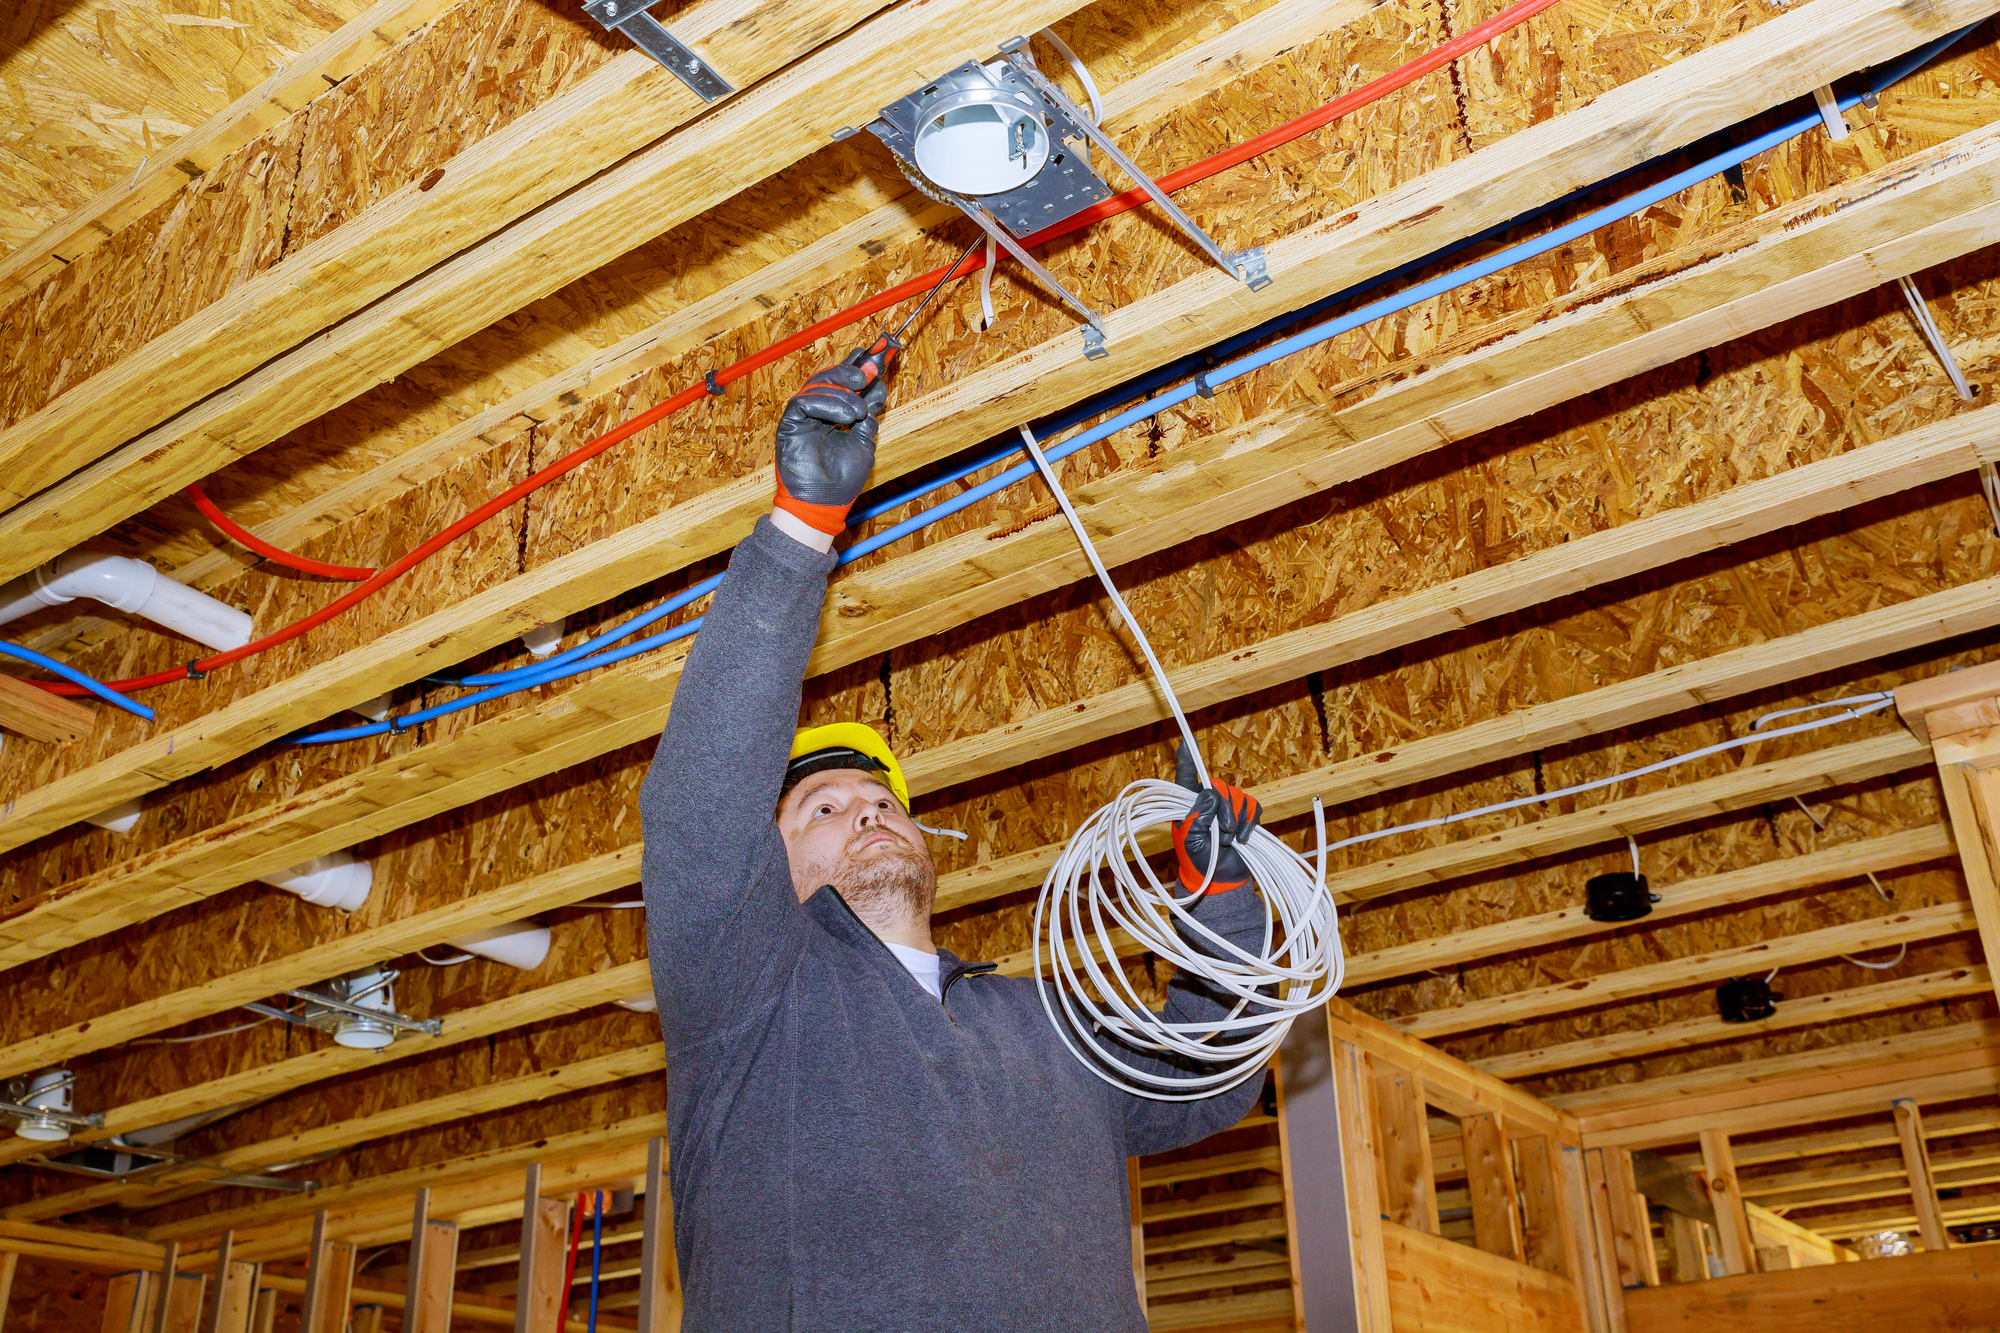 Process of installing electric wiring lights and ceiling in new home new home construction